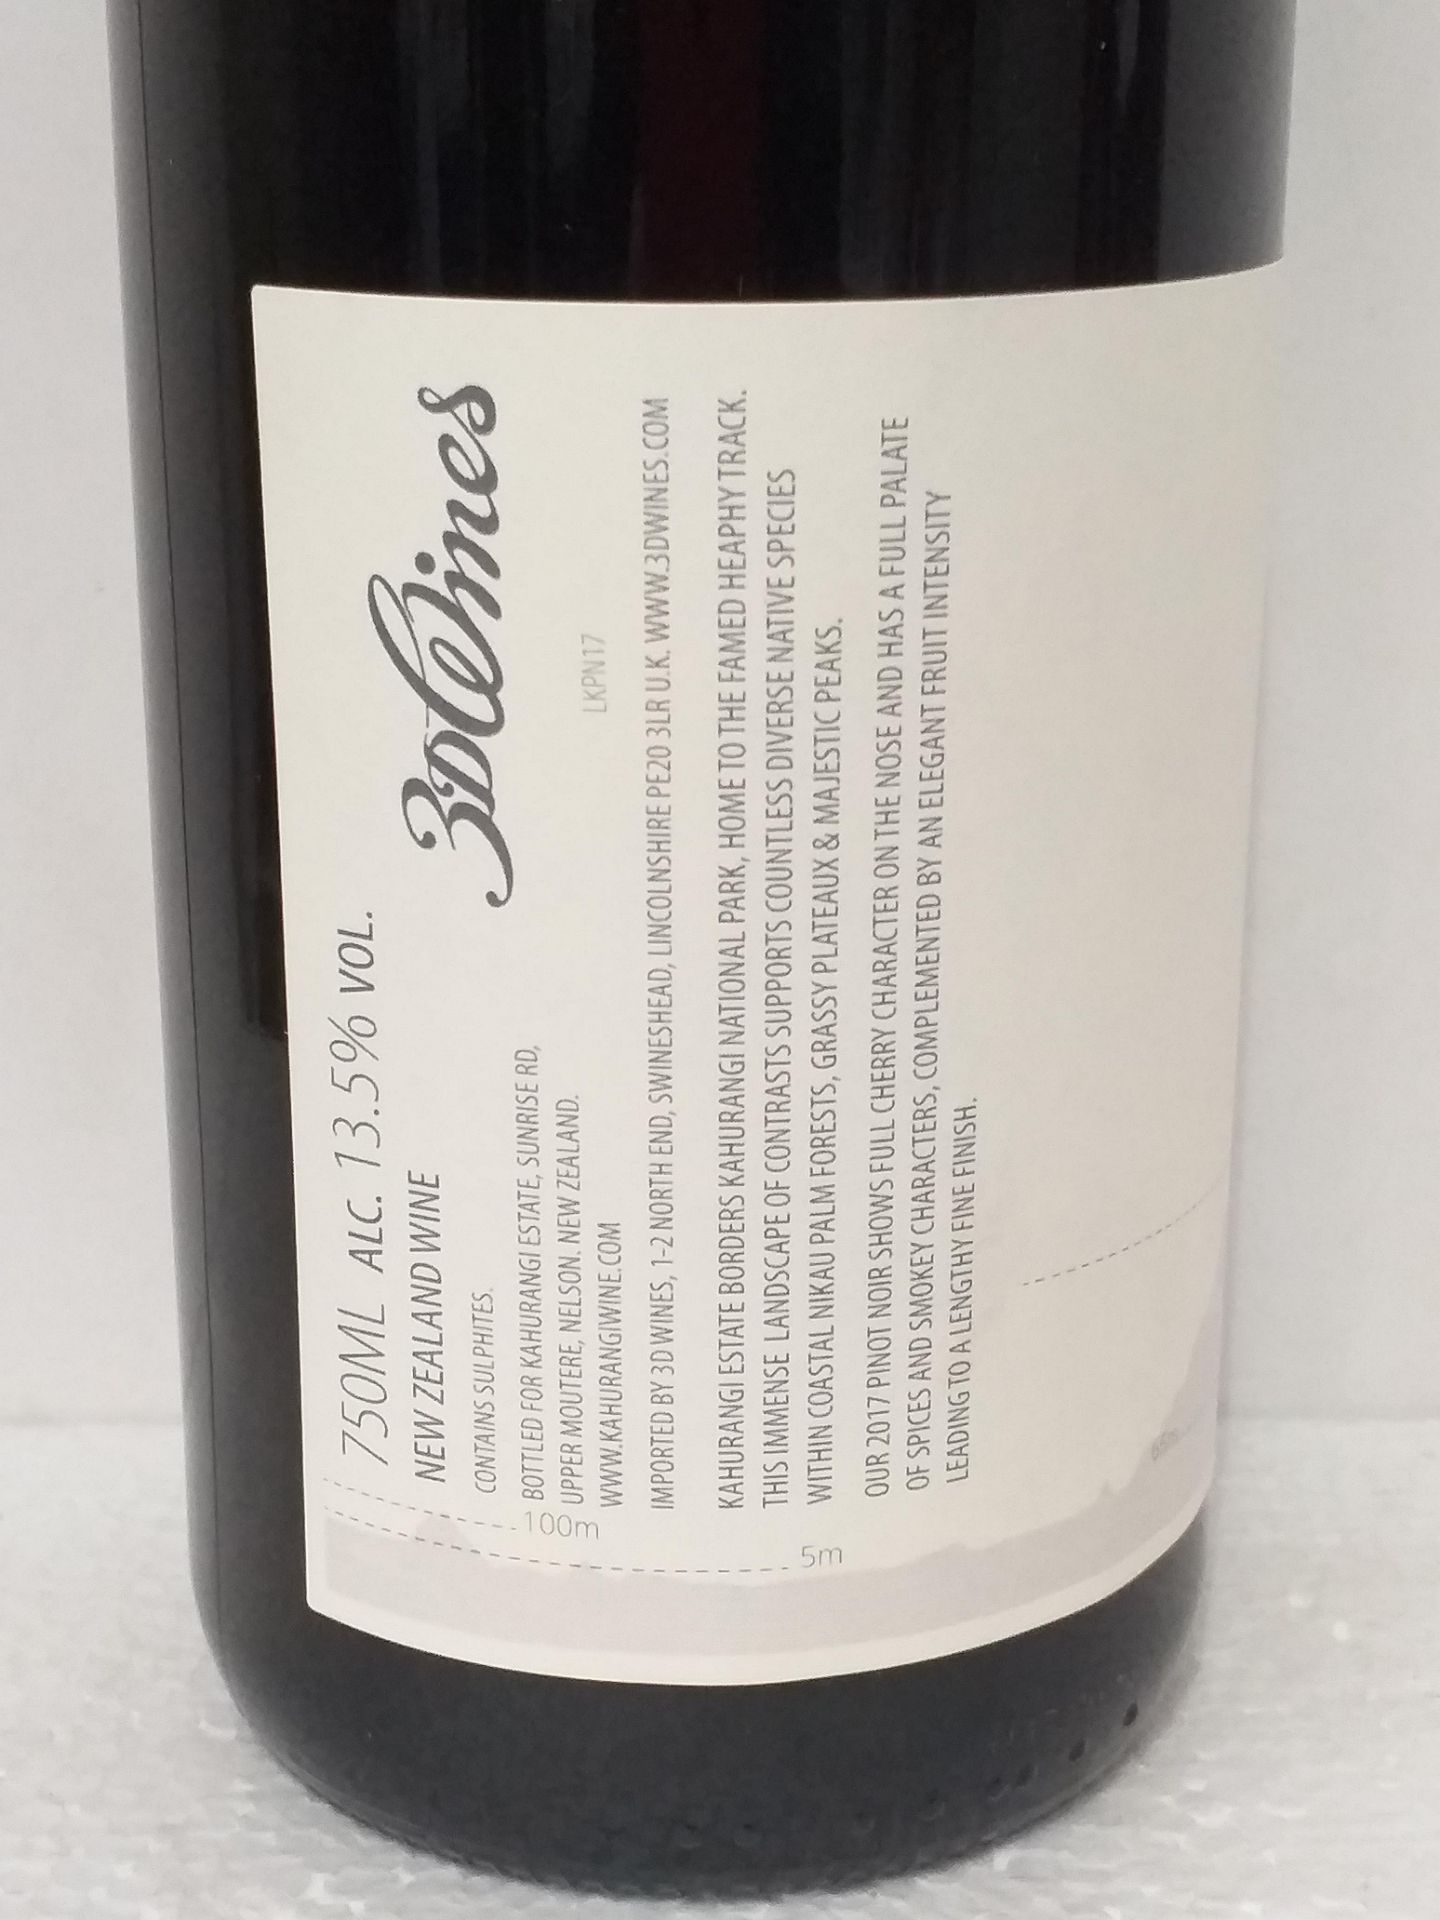 12 Bottles of Heaphy Pinot Noir 2017 - Image 3 of 3